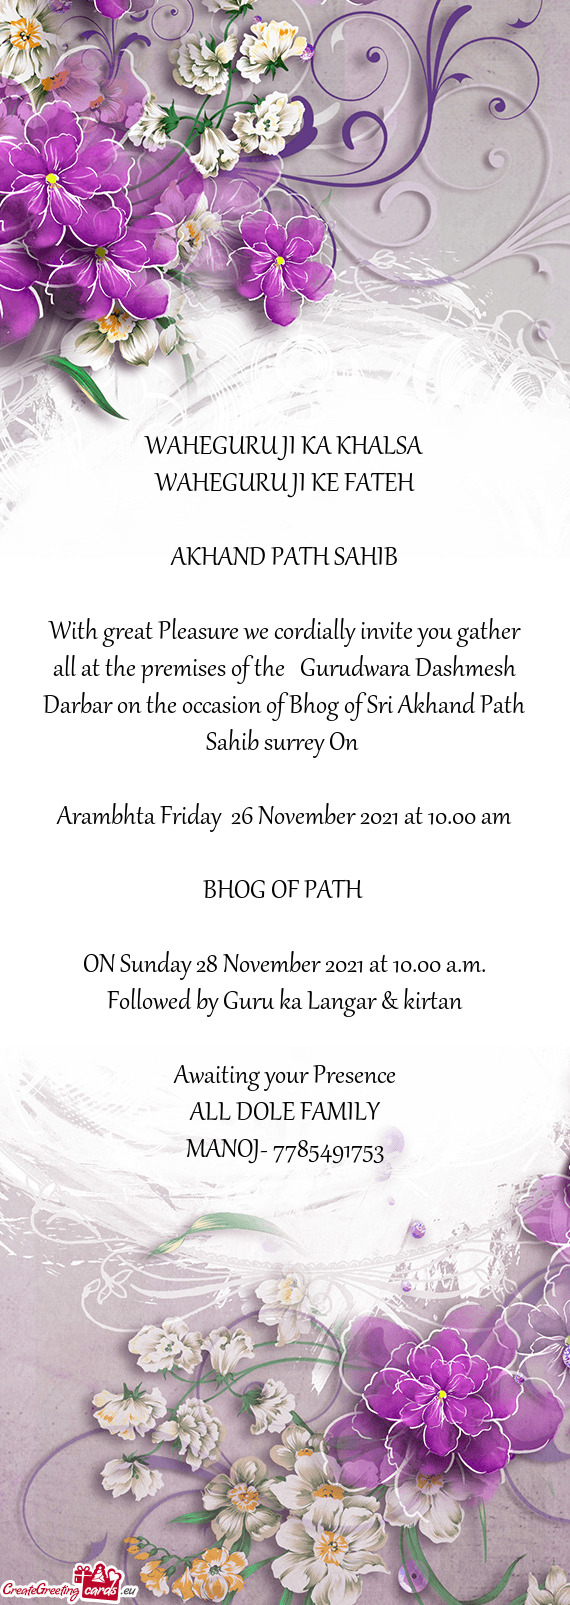 With great Pleasure we cordially invite you gather all at the premises of the Gurudwara Dashmesh D